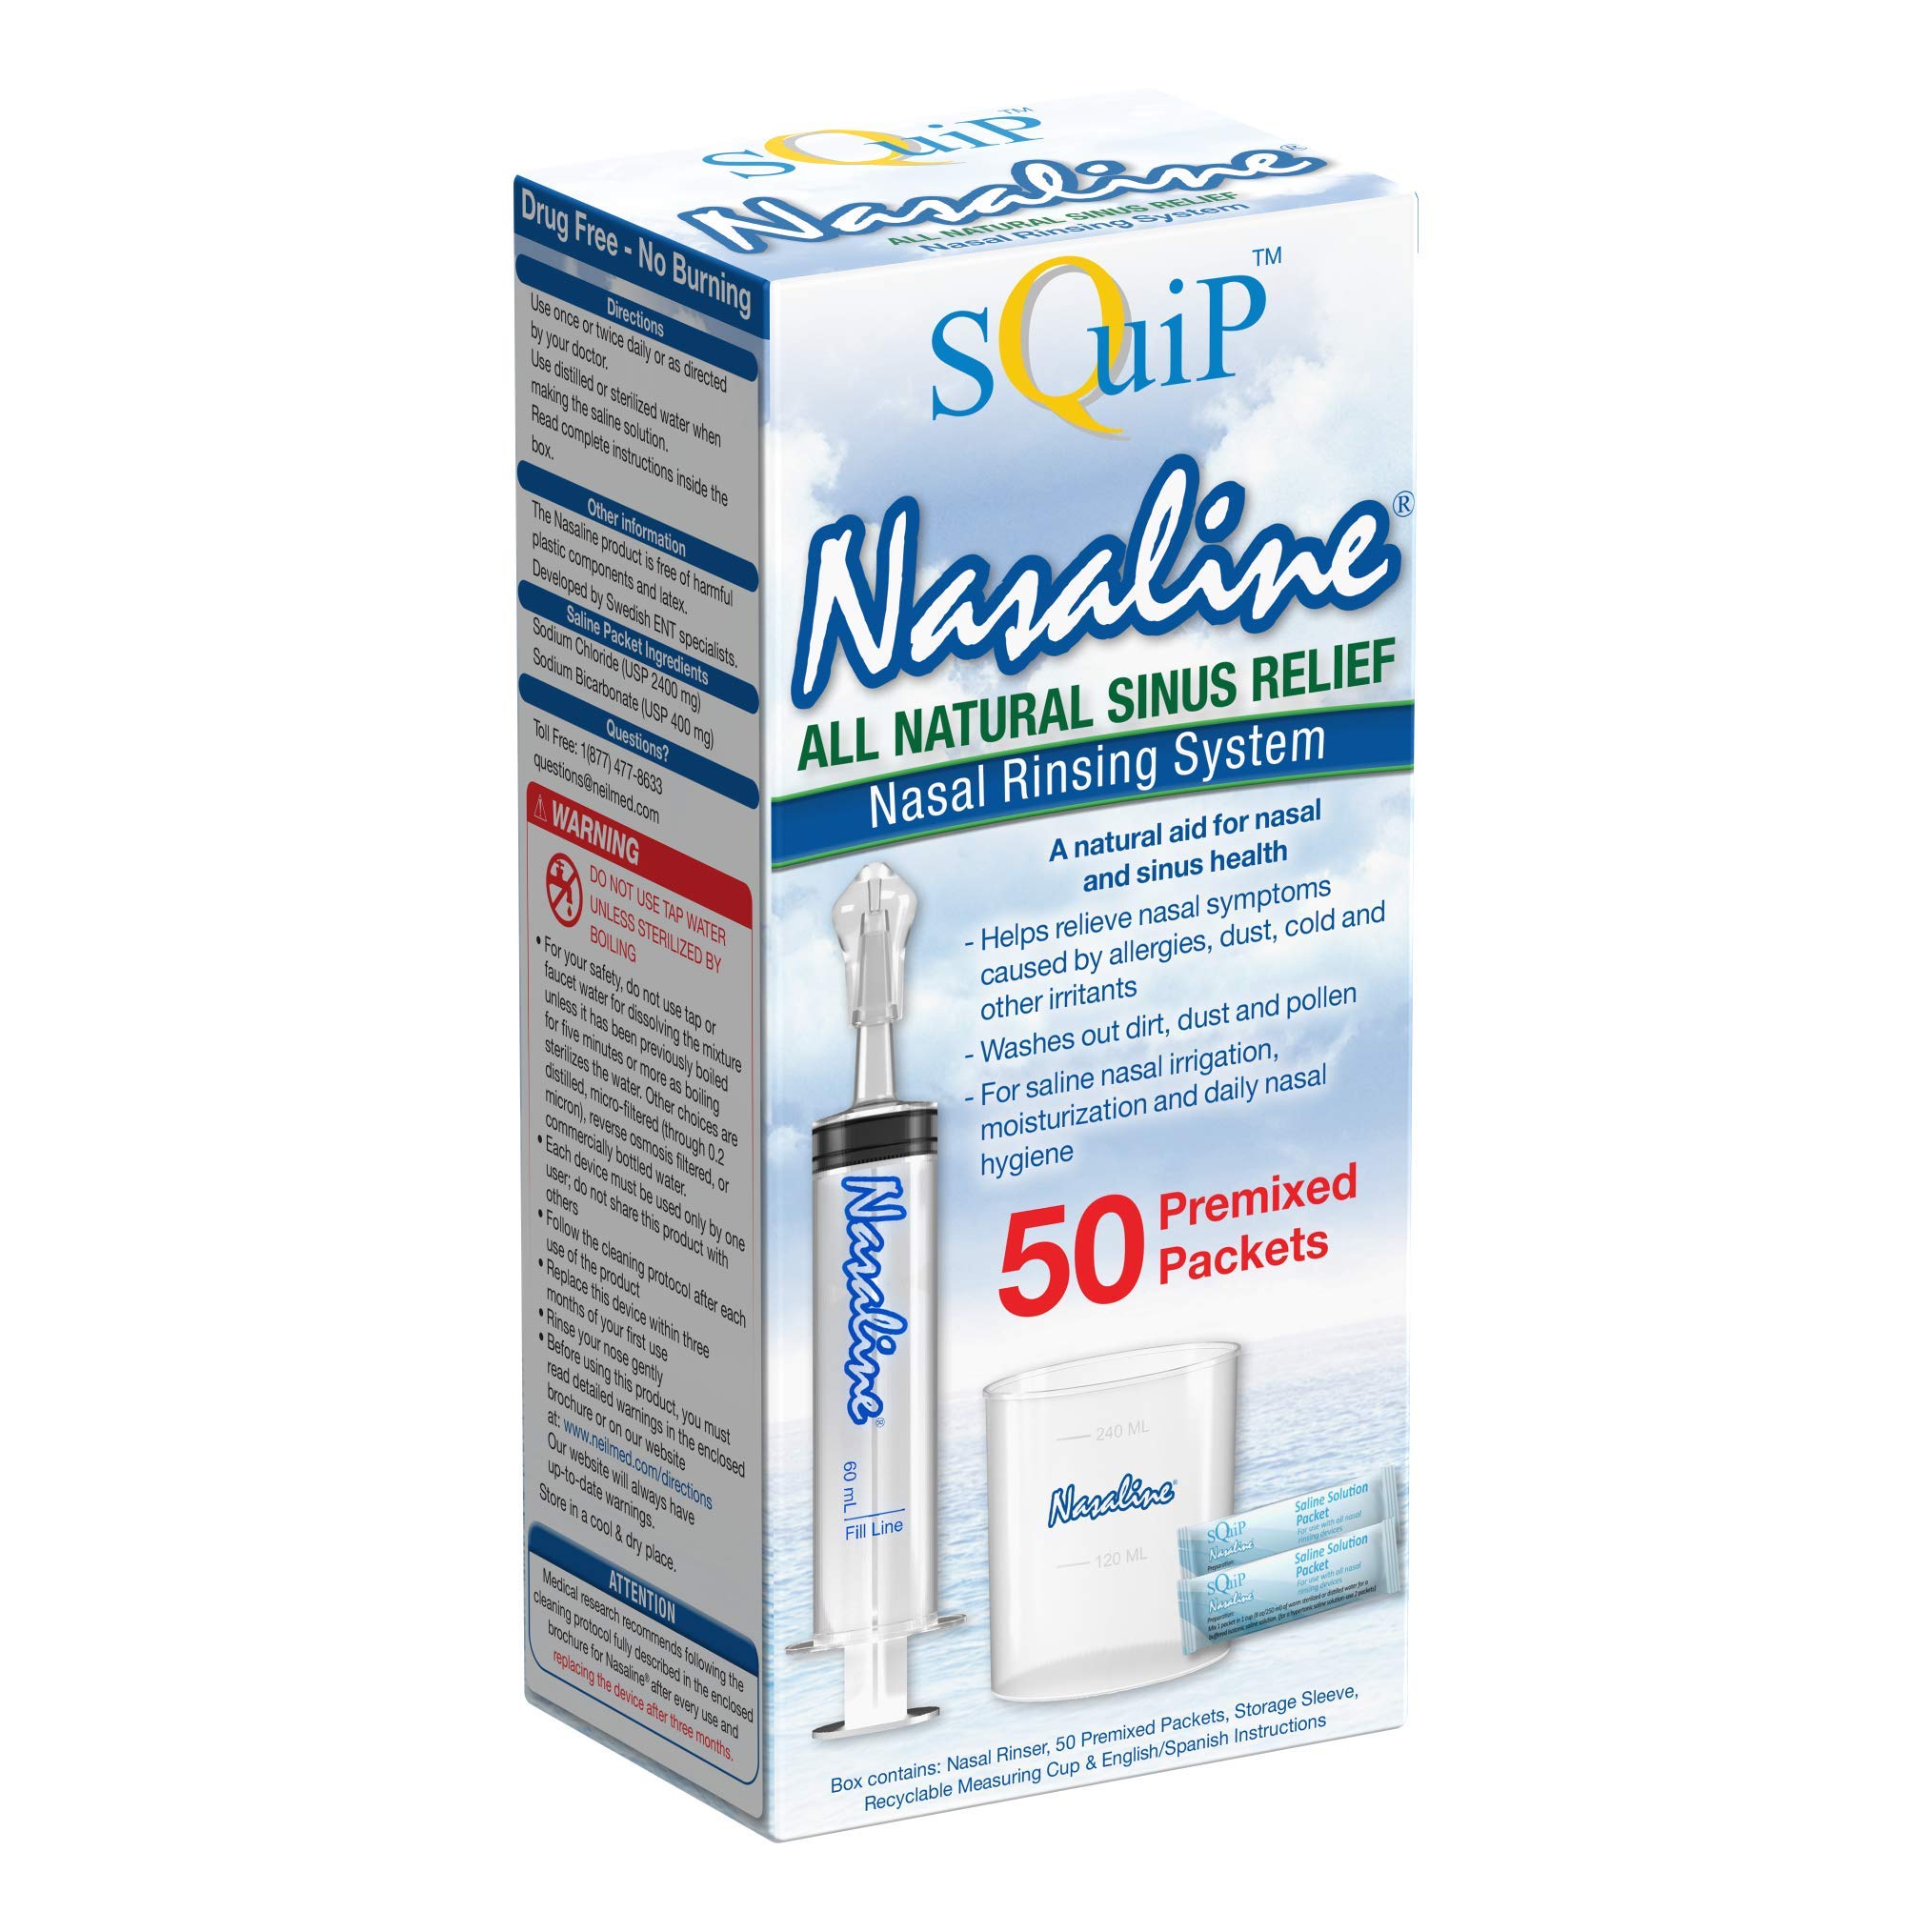 Squip Nasaline Nasal Rinsing Kit with 50 Premixed Saline Packets, One Color